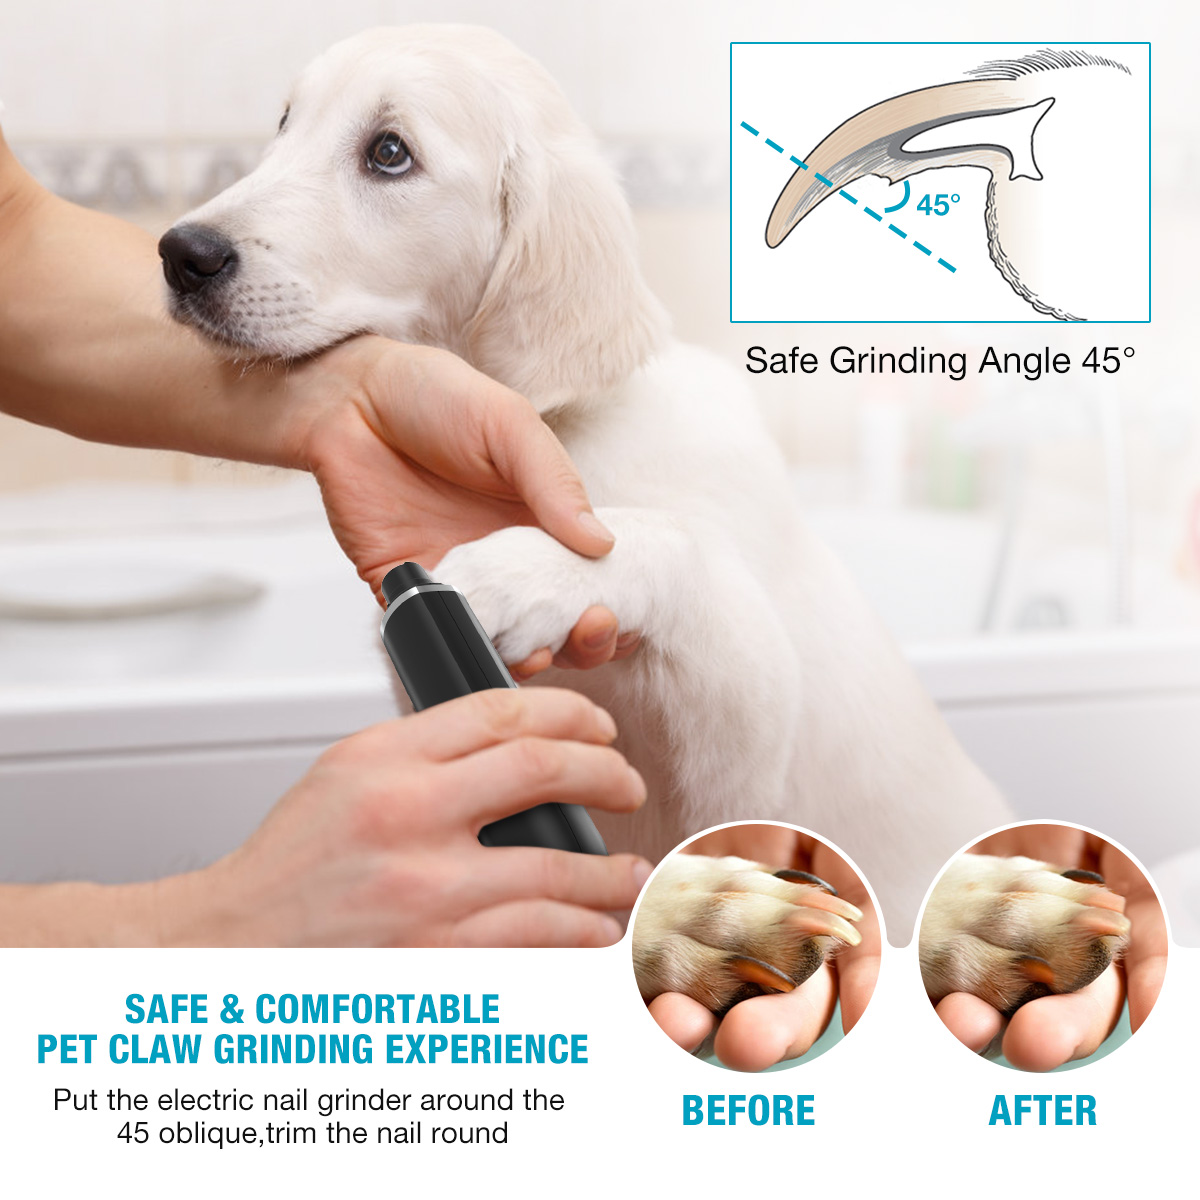 BKVESHI-Dog-Nail-GrinderPet-Nail-Trimmer-Adjustable-2-Speed-Quiet-Pet-Nail-Grinder-with-Dog-Nail-Fil-1940467-2